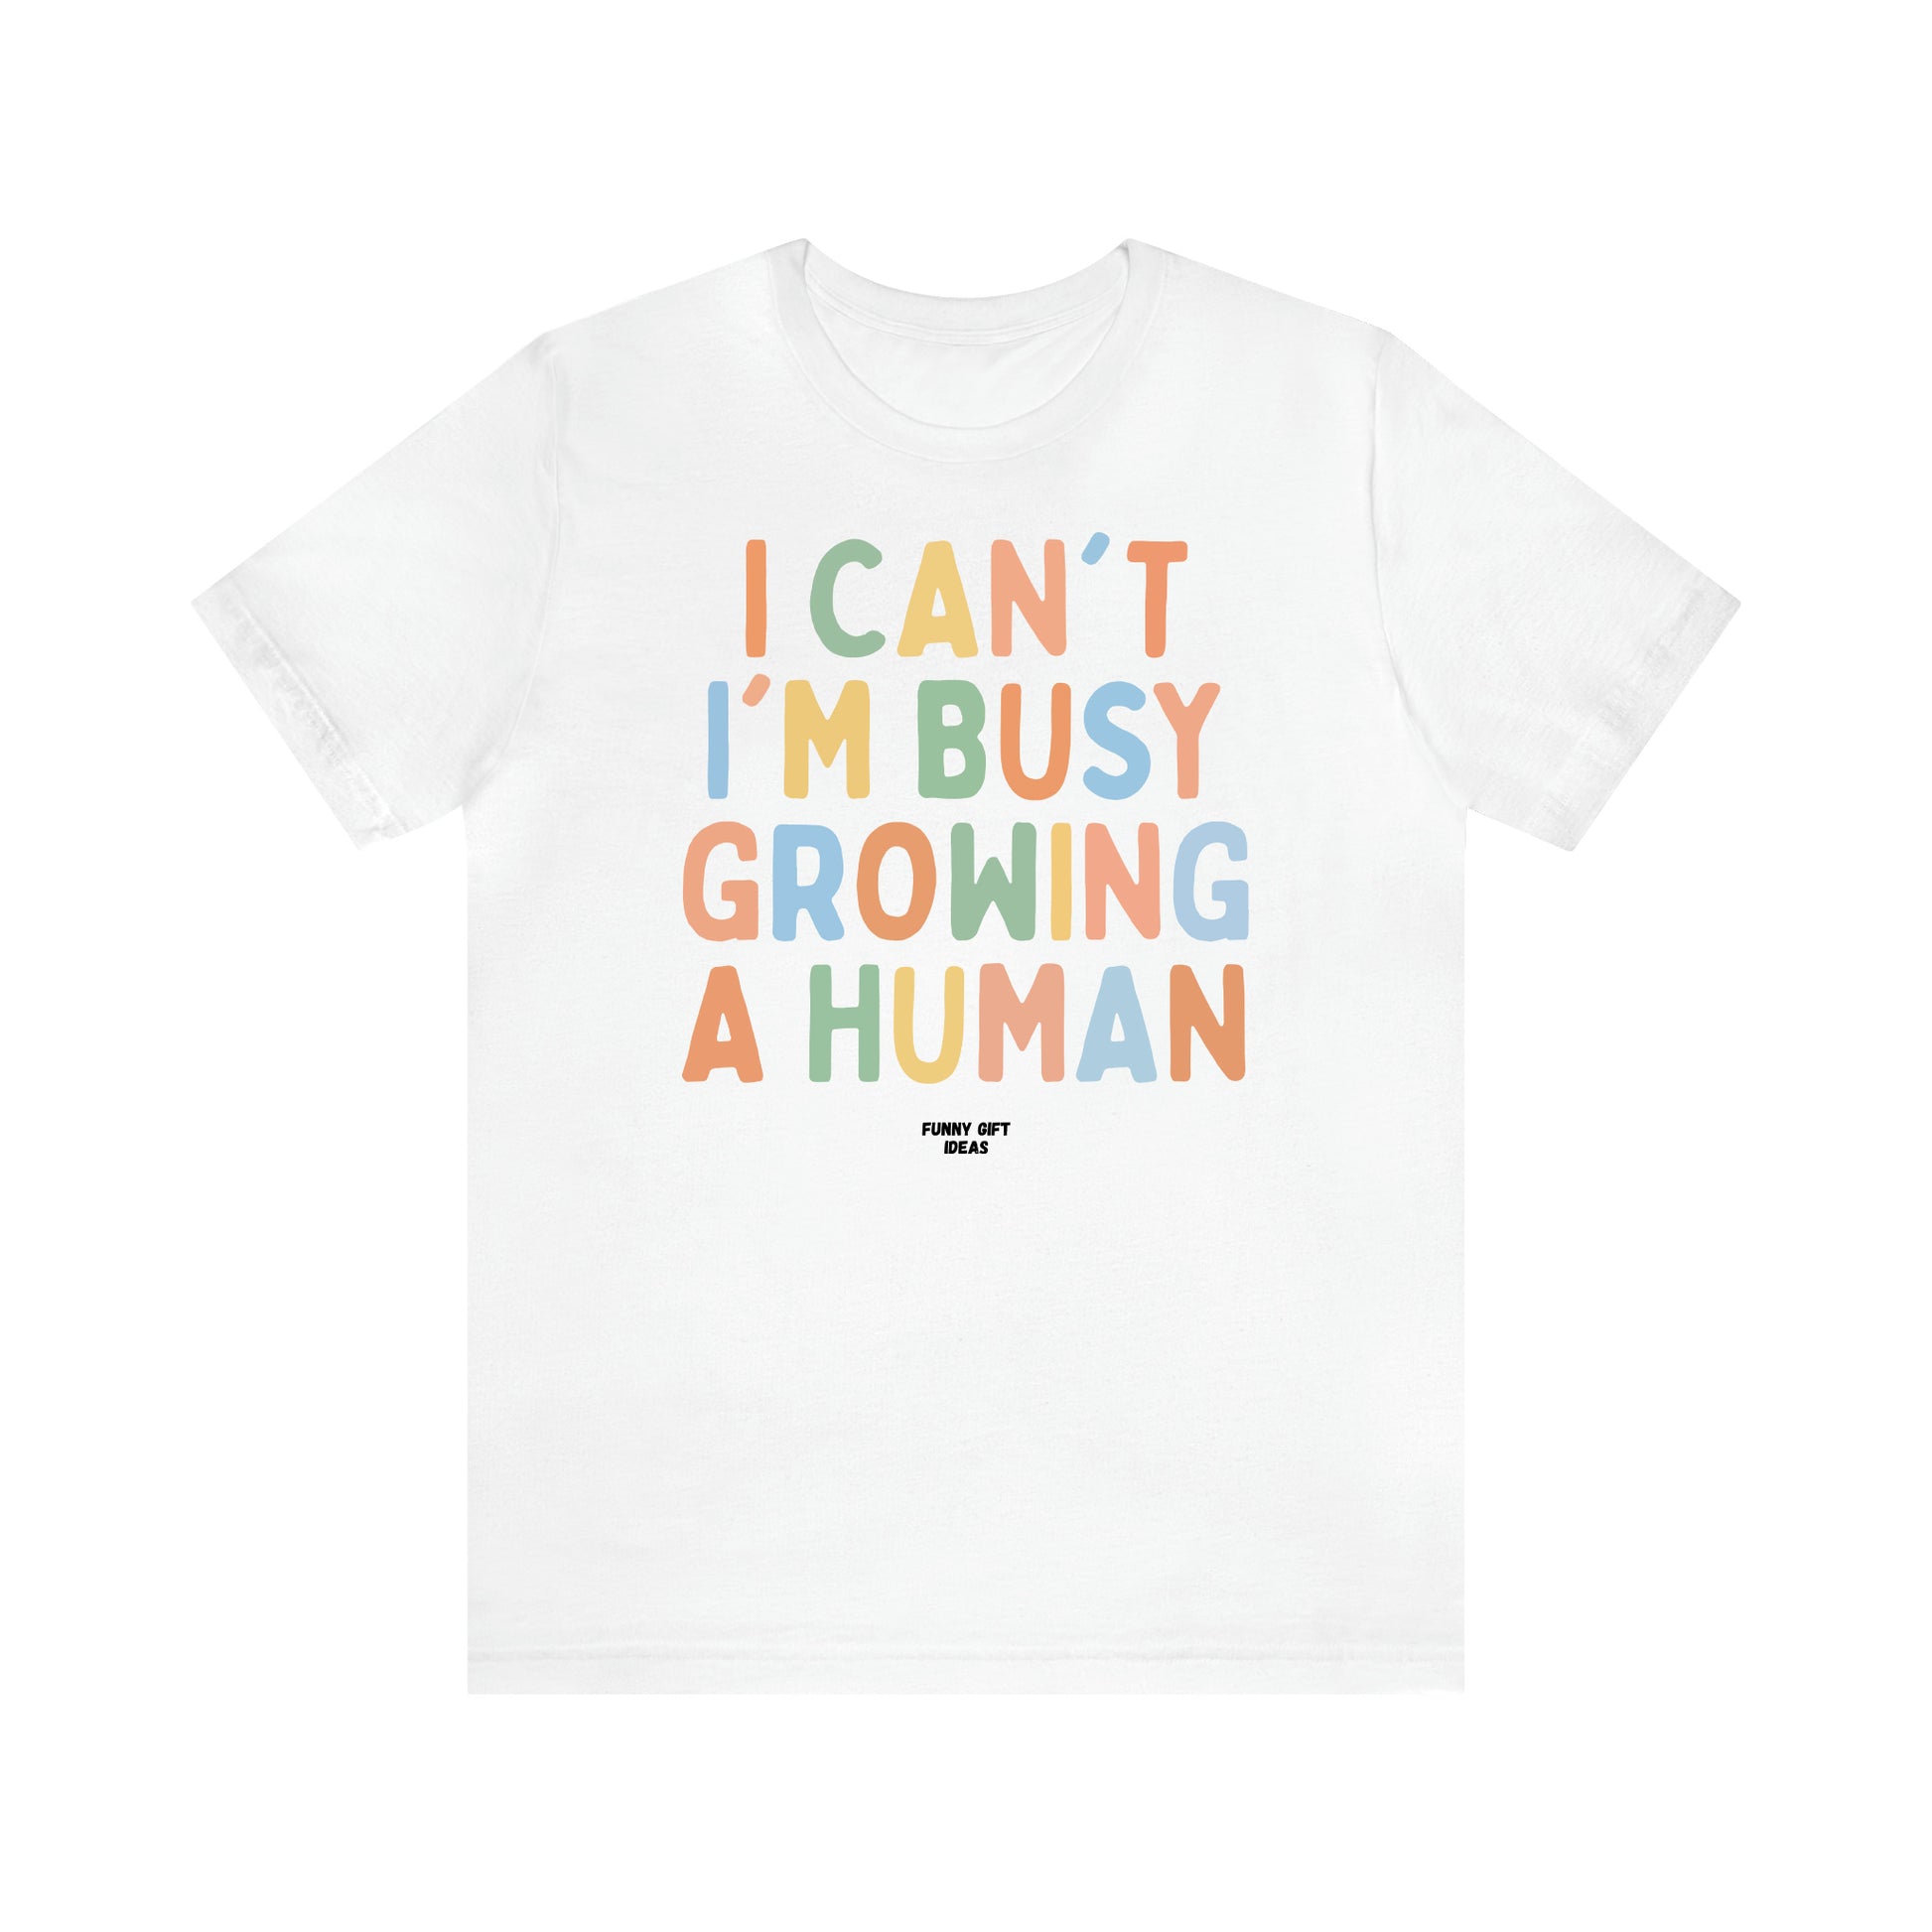 Women's T Shirts I Can't I'm Busy Growing a Human - Funny Gift Ideas